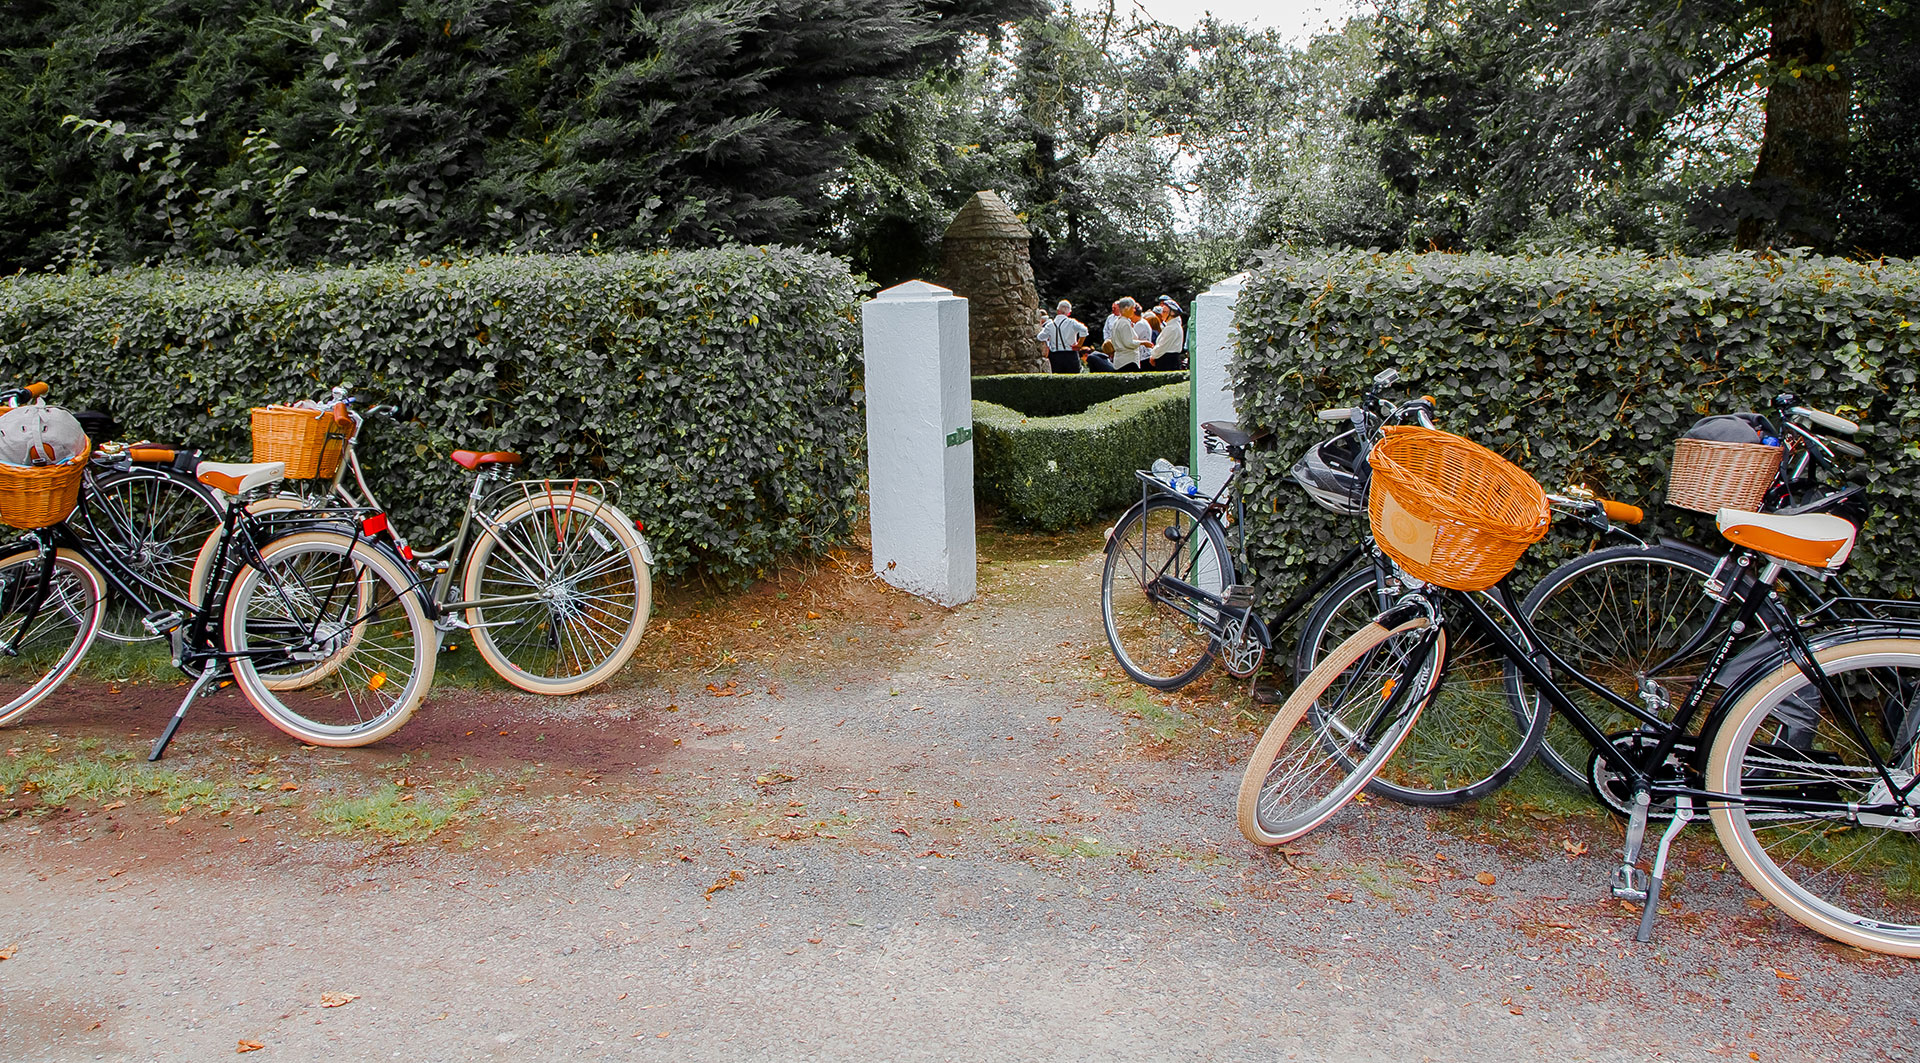 Group of vintage Bikes outside St. Fintans Well in Co. Laois